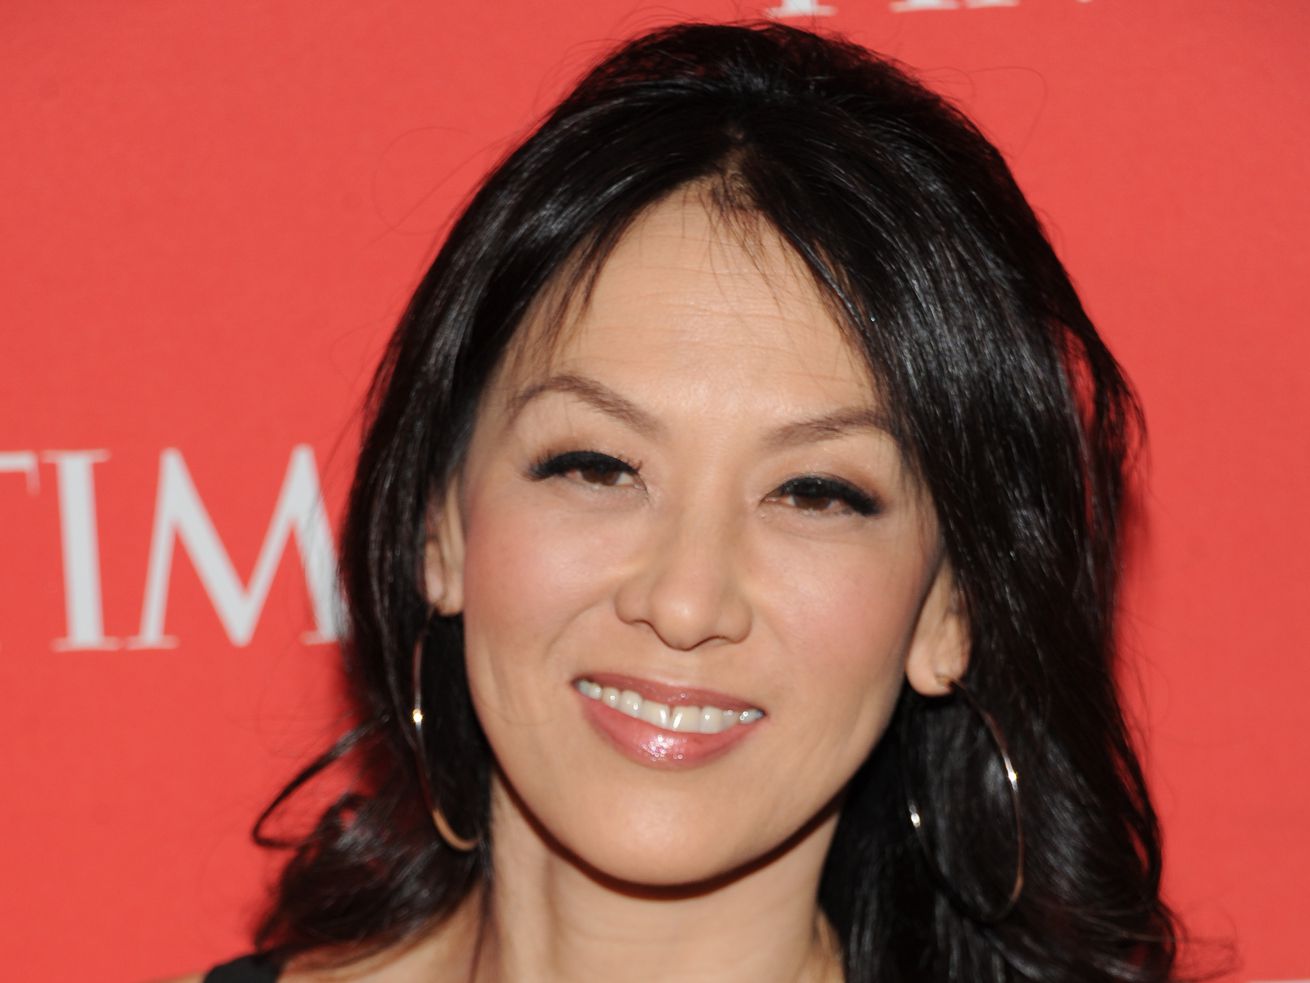 Writer Amy Chua, author of “Battle Hymn of the Tiger Mother,” will deliver a BYU forum address on March 29.